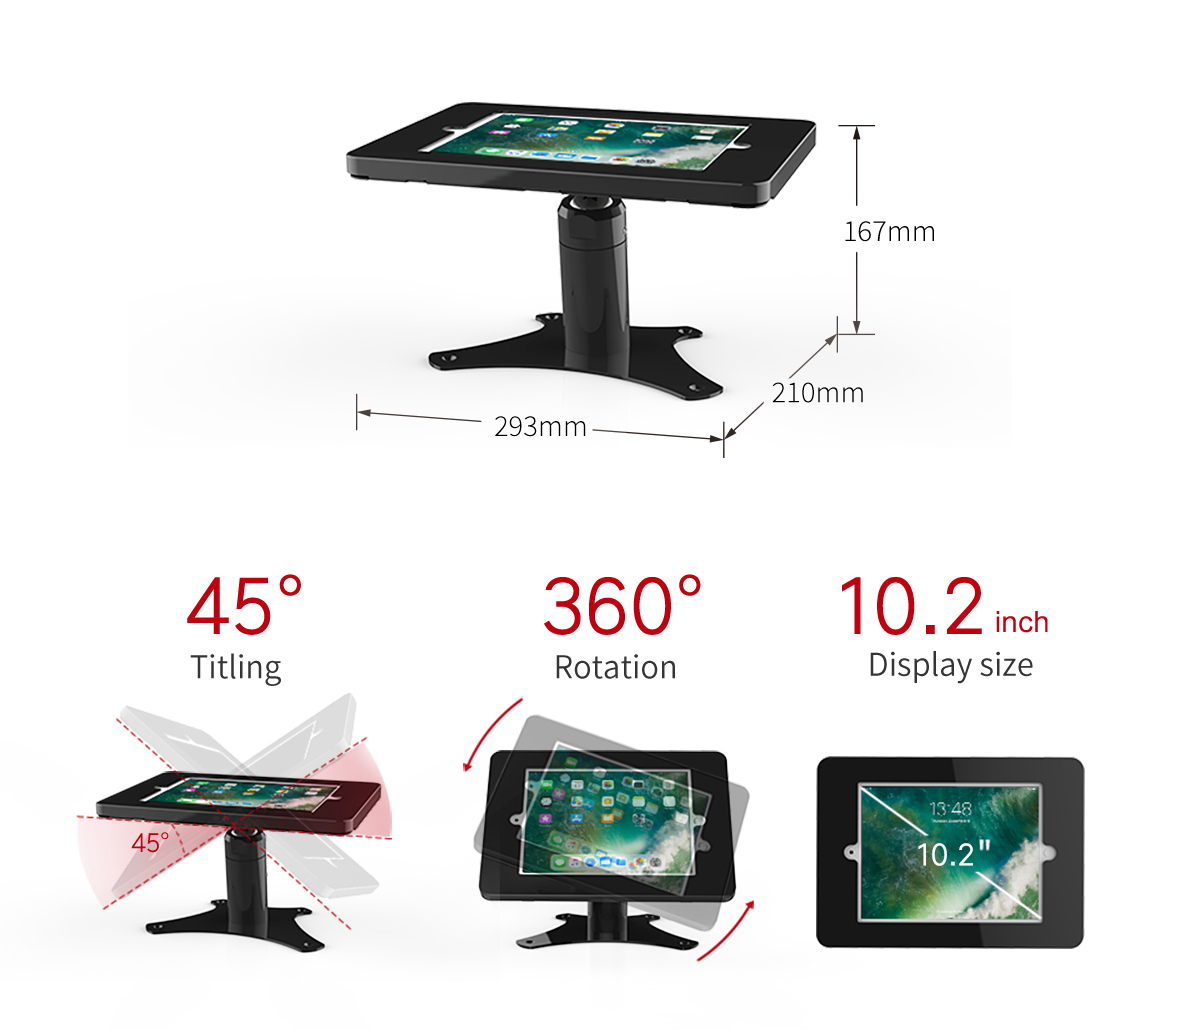 Product size picture